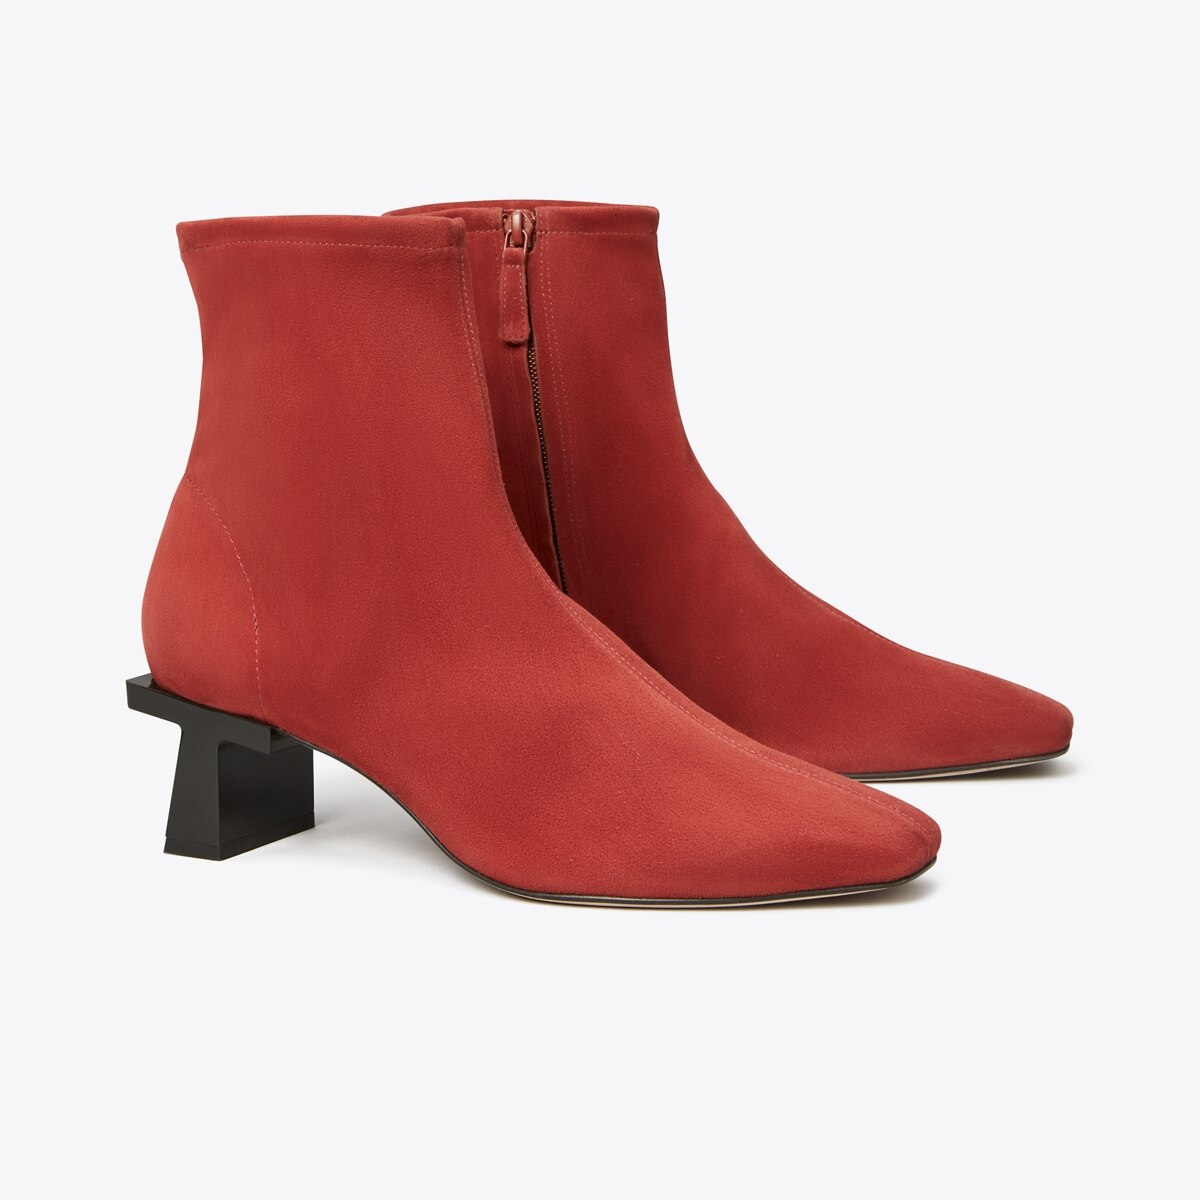 Block T Heel Ankle Boot: Women's Designer Ankle Boots | Tory Burch